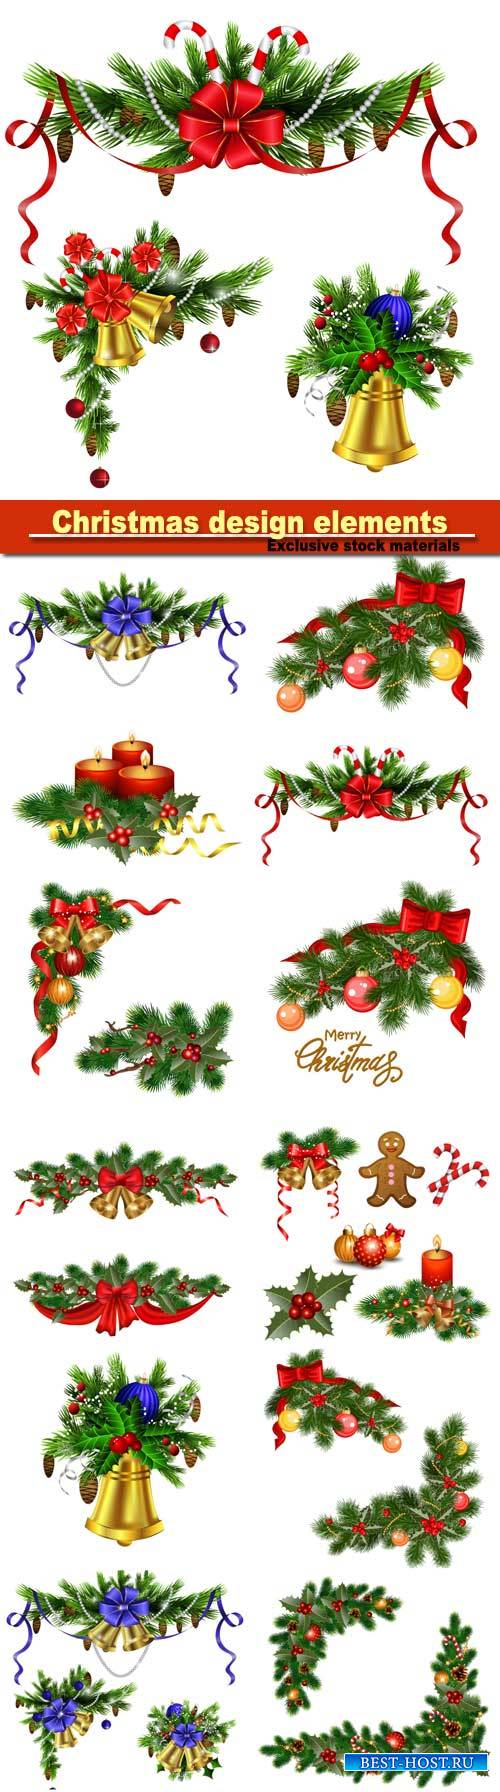 Christmas design elements, background with fir tree, holly and decorative elements